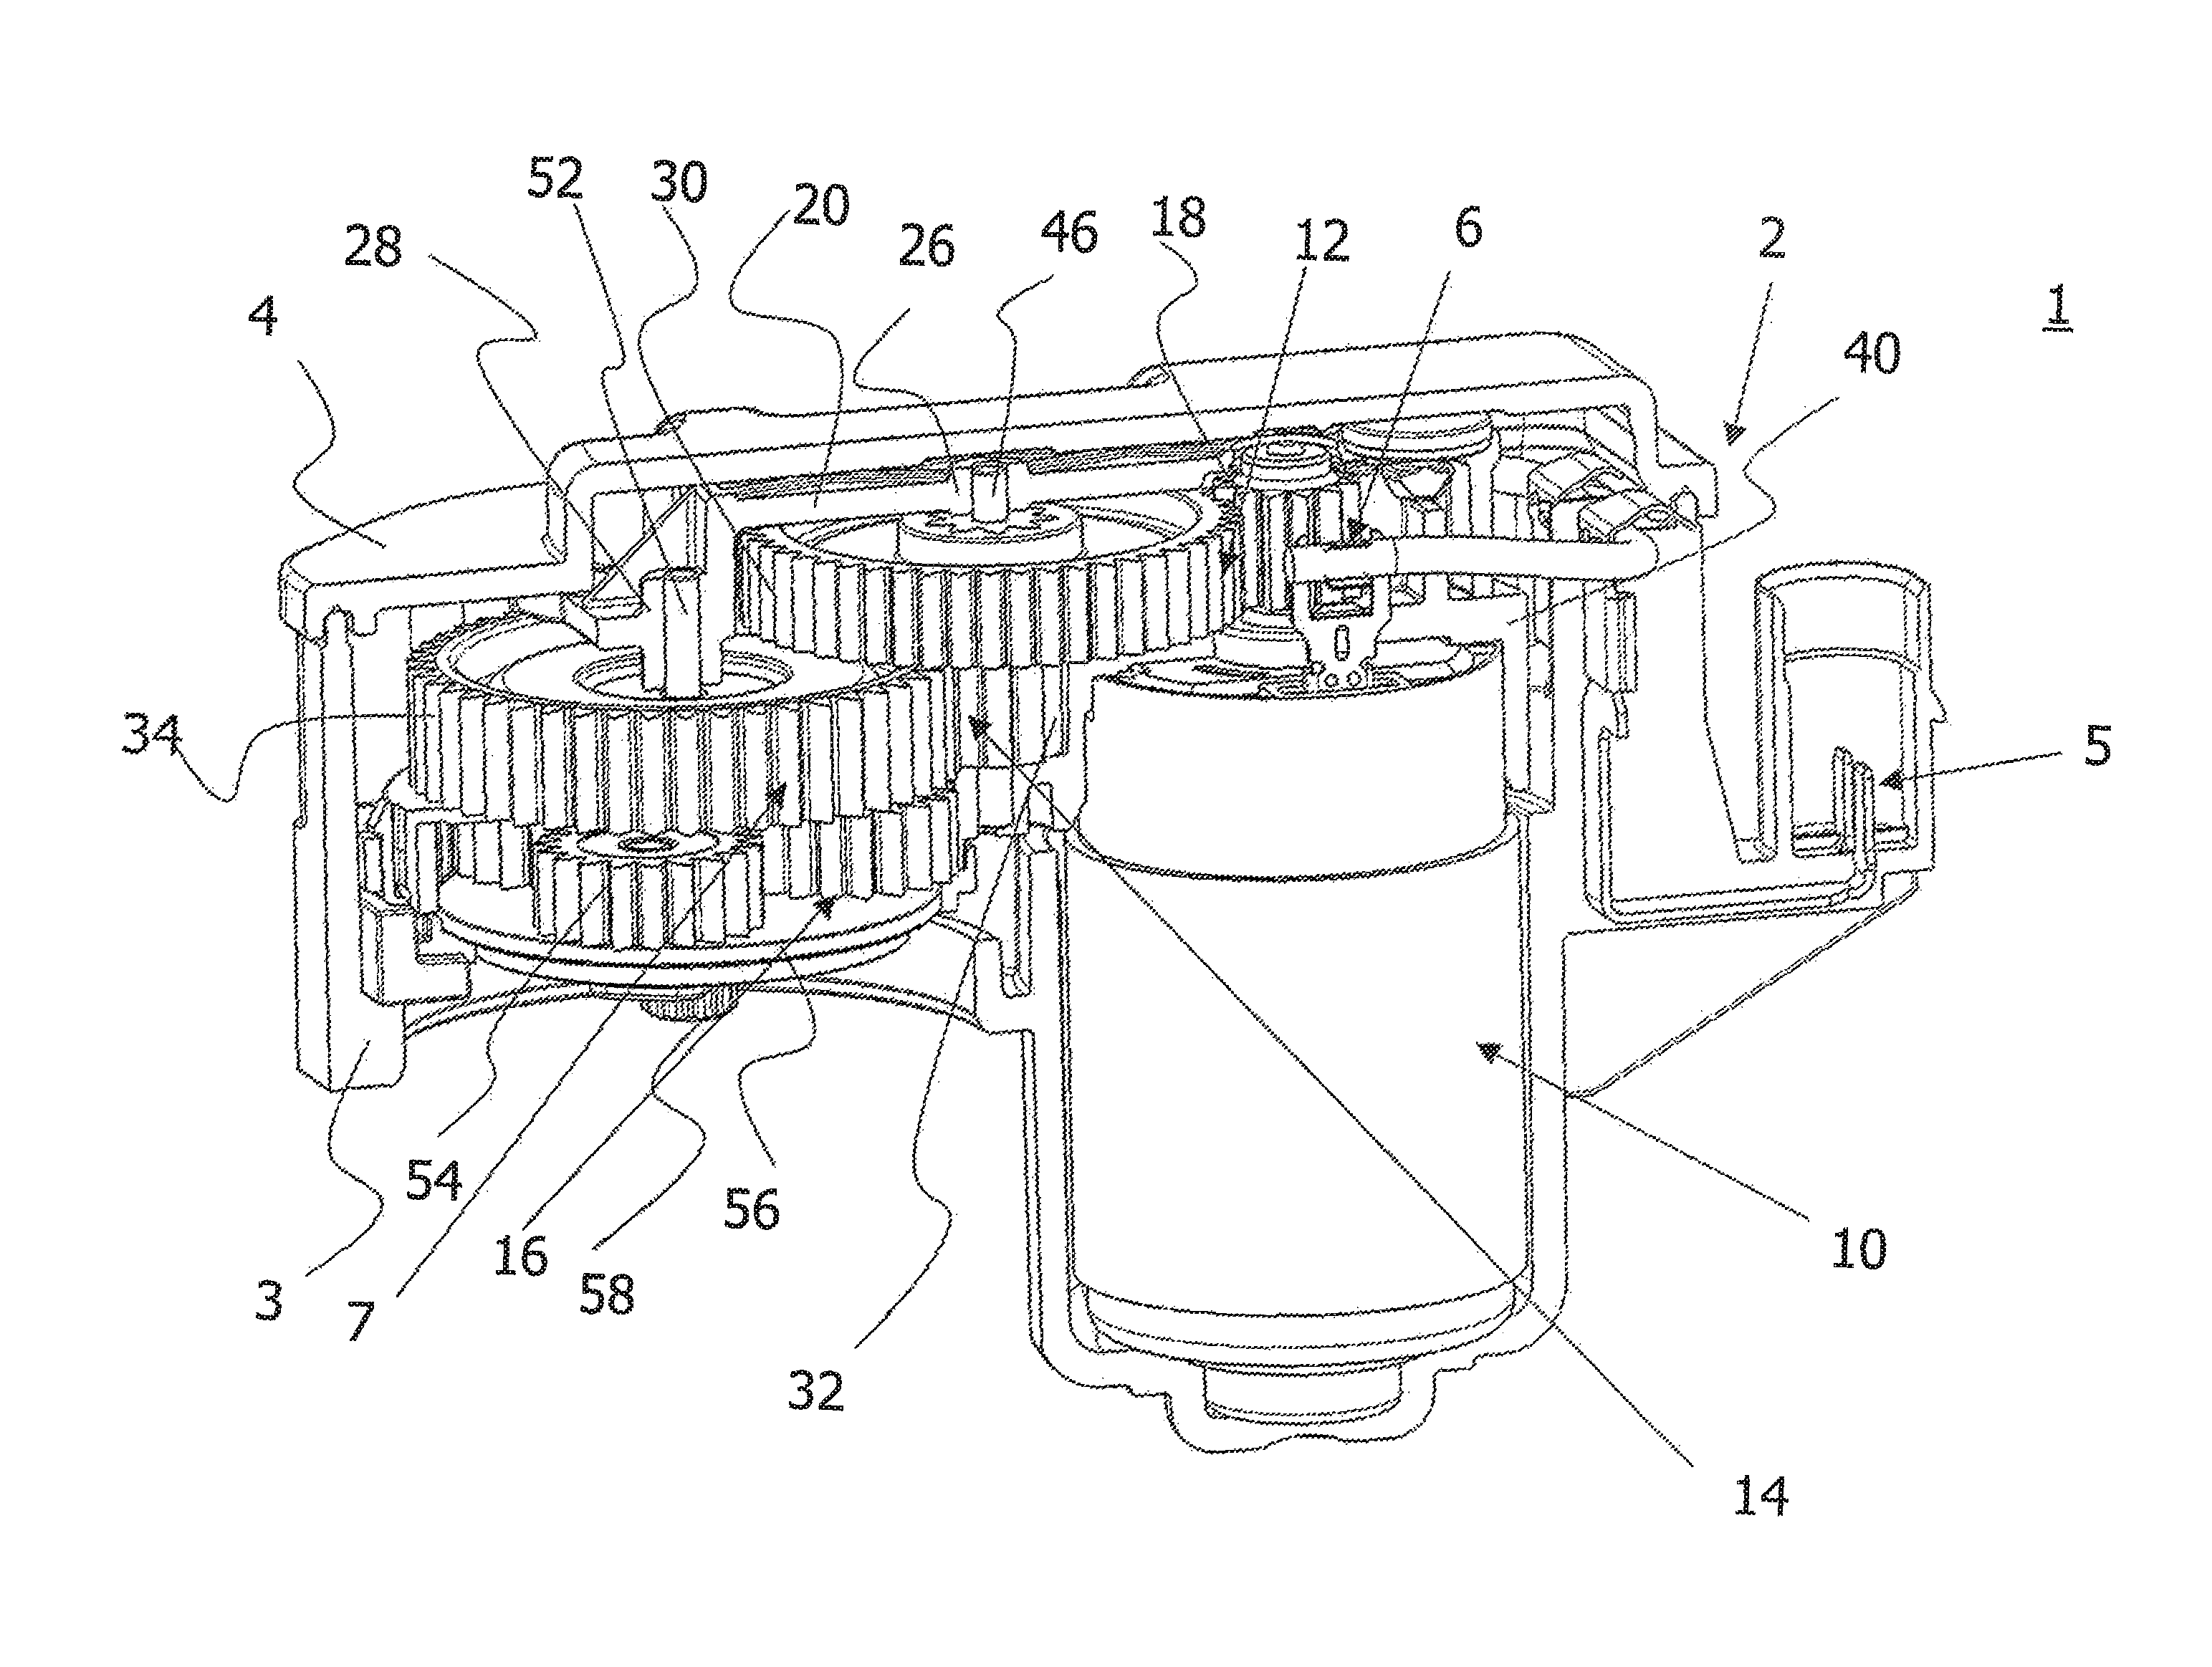 Sub-assembly for an electromechanical brake actuator